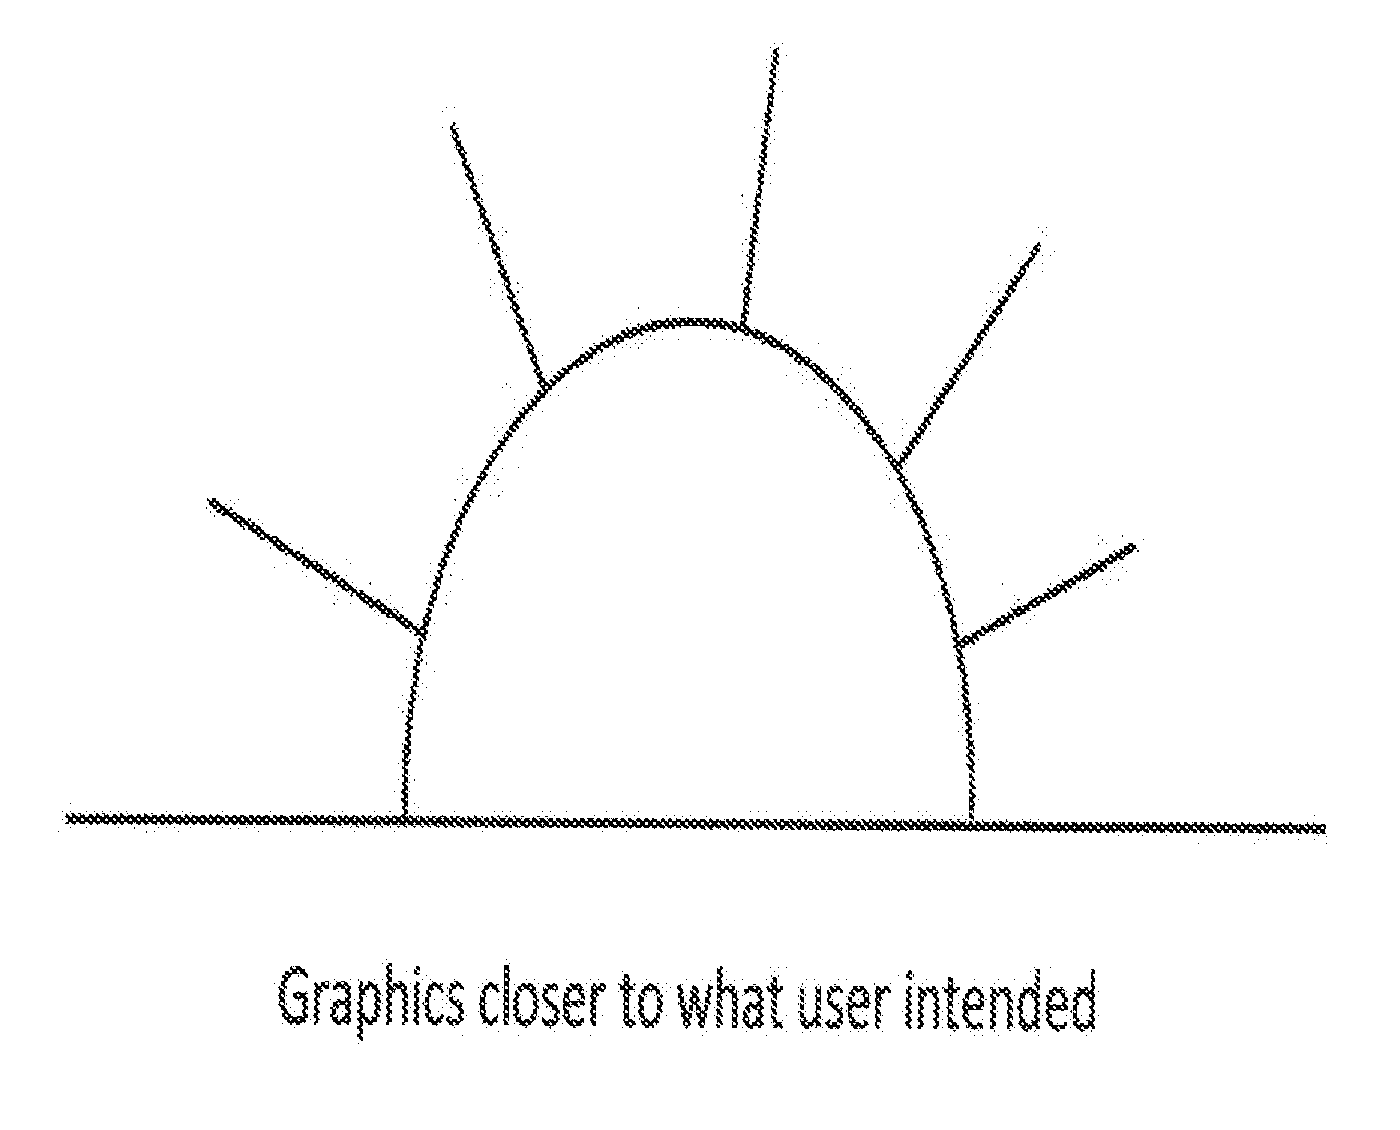 System and Method for Interactive Sketch Recognition Based on Geometric Contraints